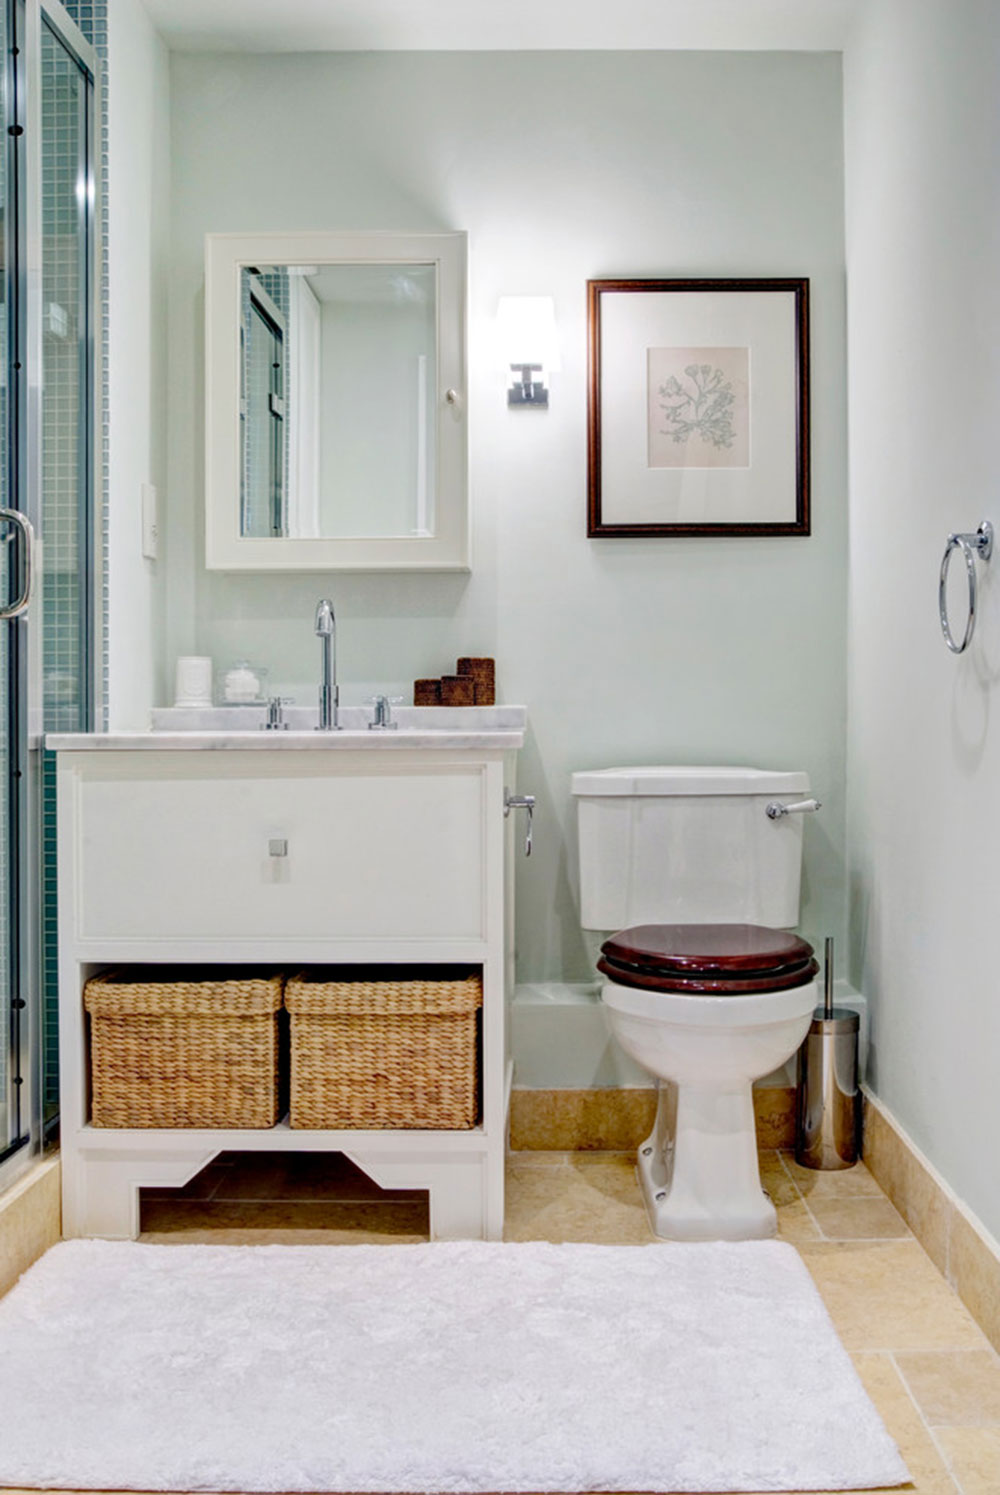 Westminster-Apartment-by-Lisette-Voute-Designs Small bathroom storage ideas you shouldn’t neglect